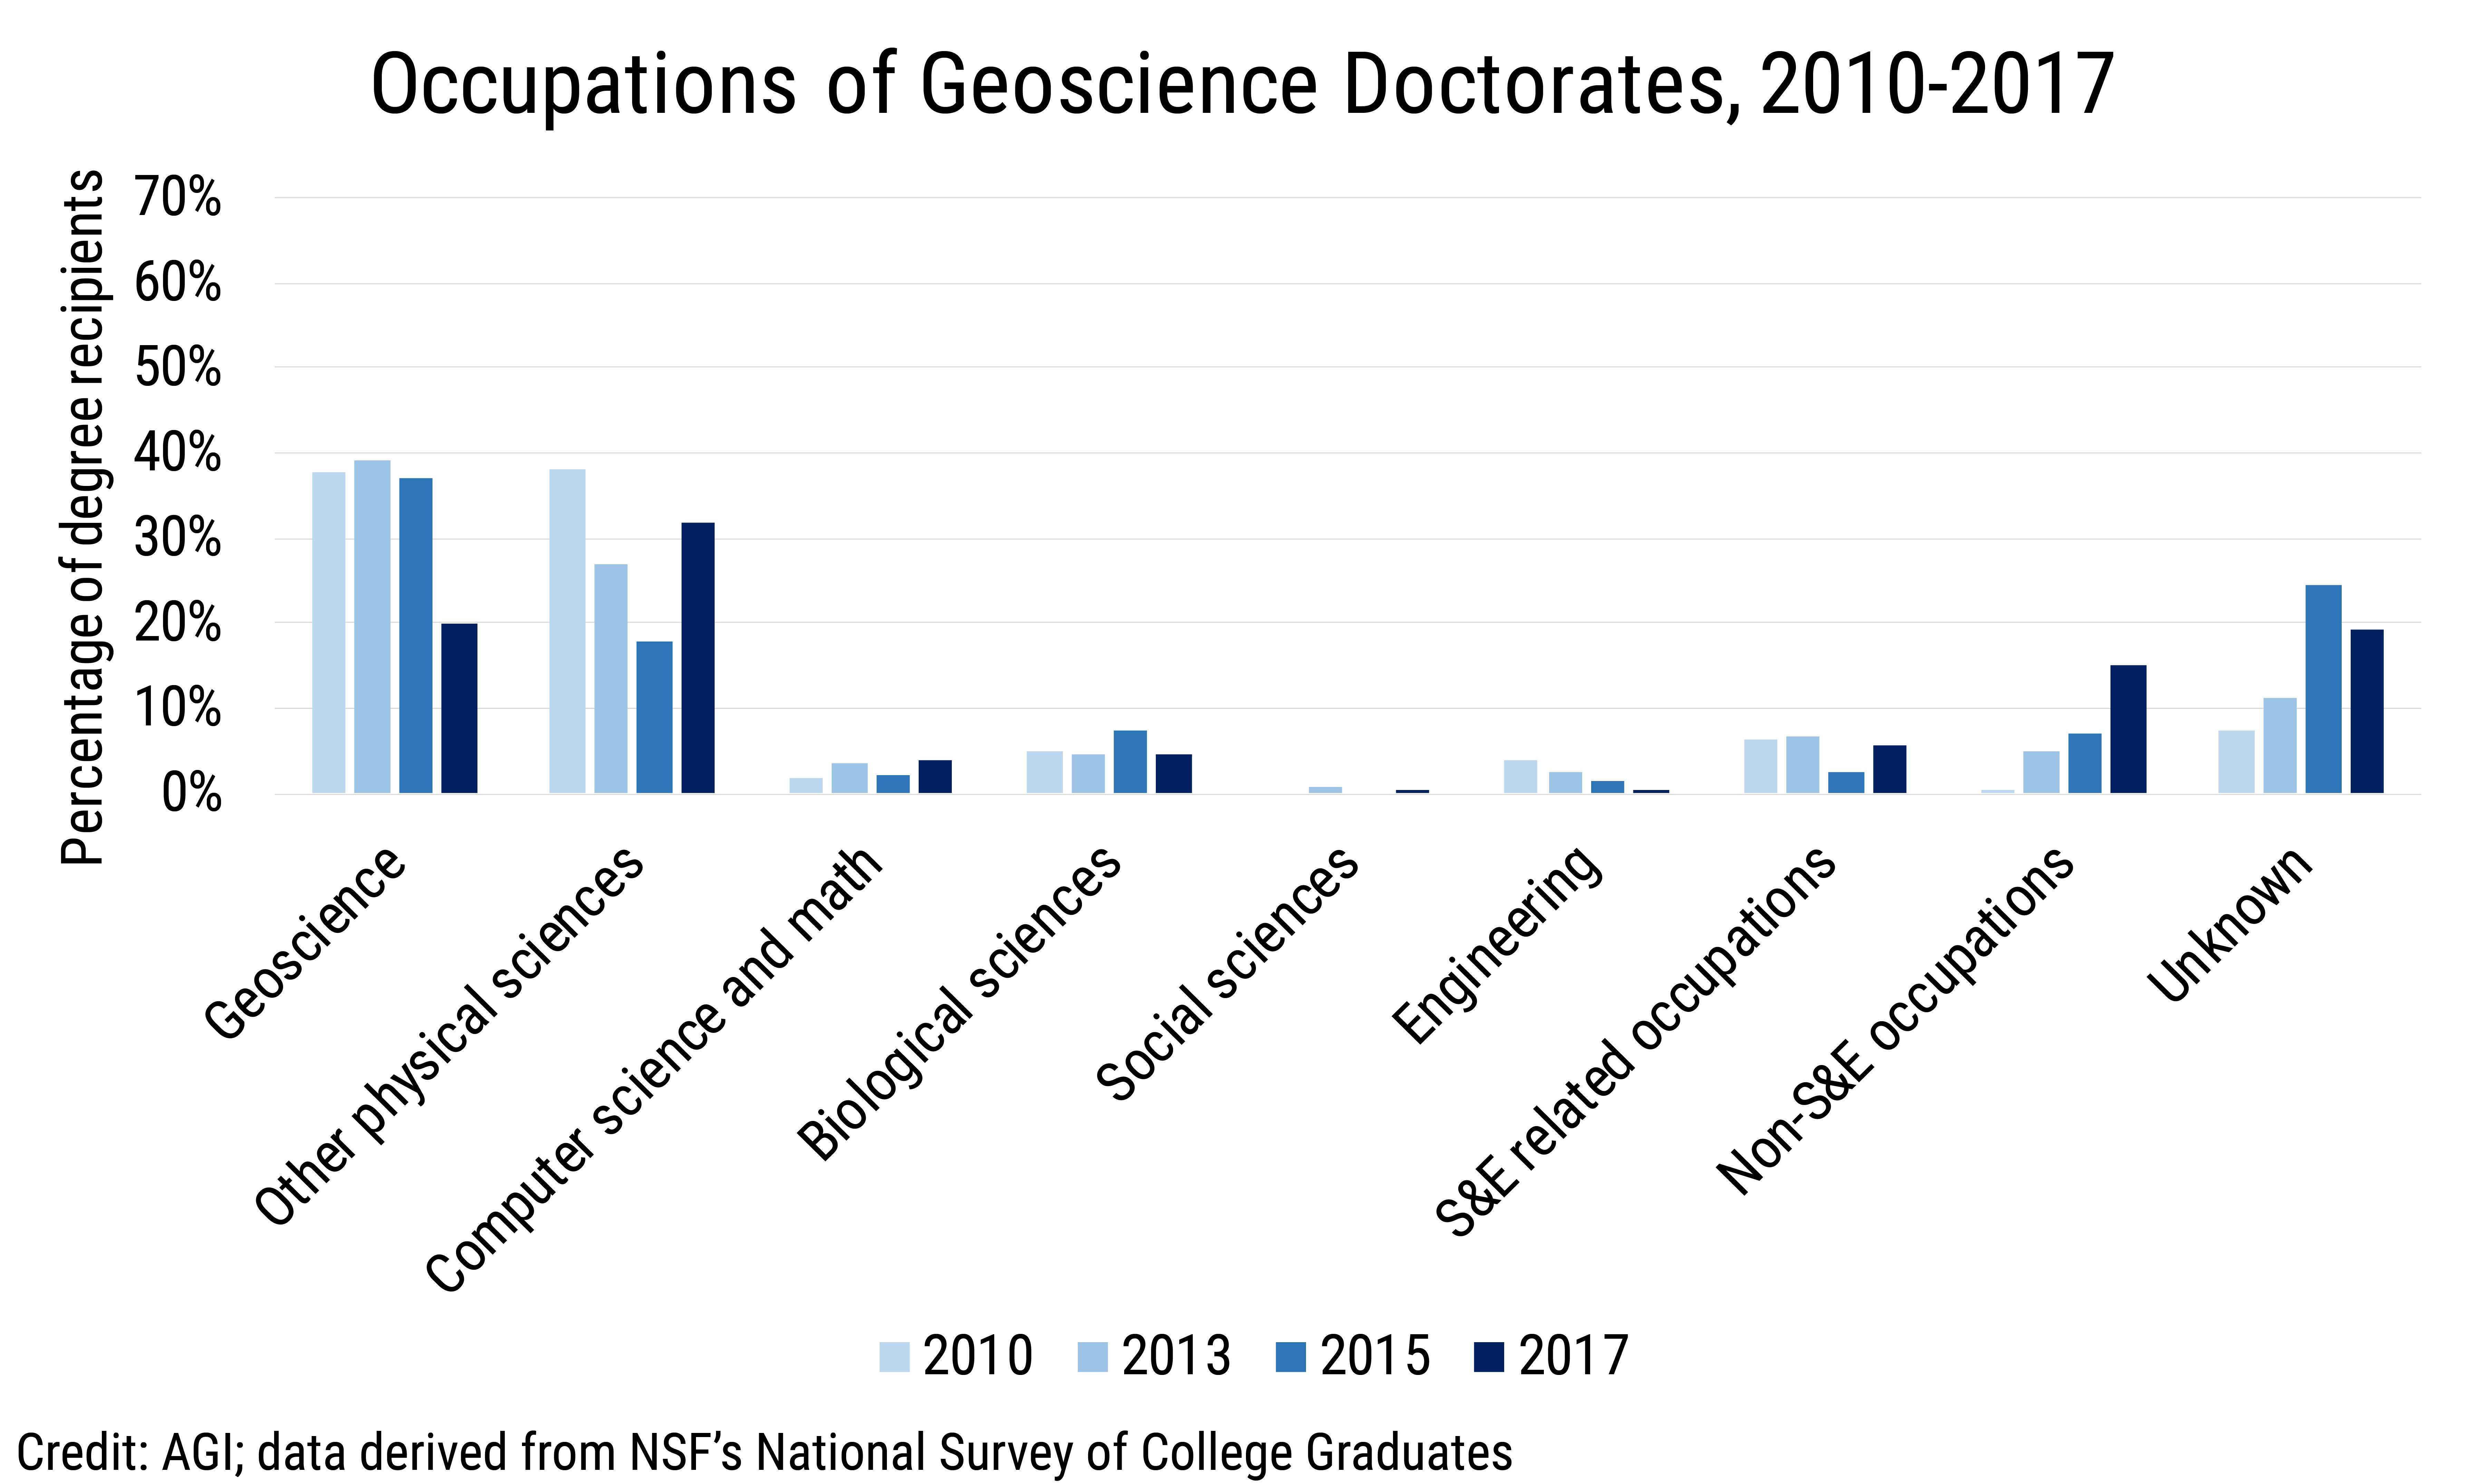 Data Brief 2019-014 chart 03: Occupations of Geoscience Doctorates, 2010-2017 (credit: AGI; data derived from NSF NSCG)